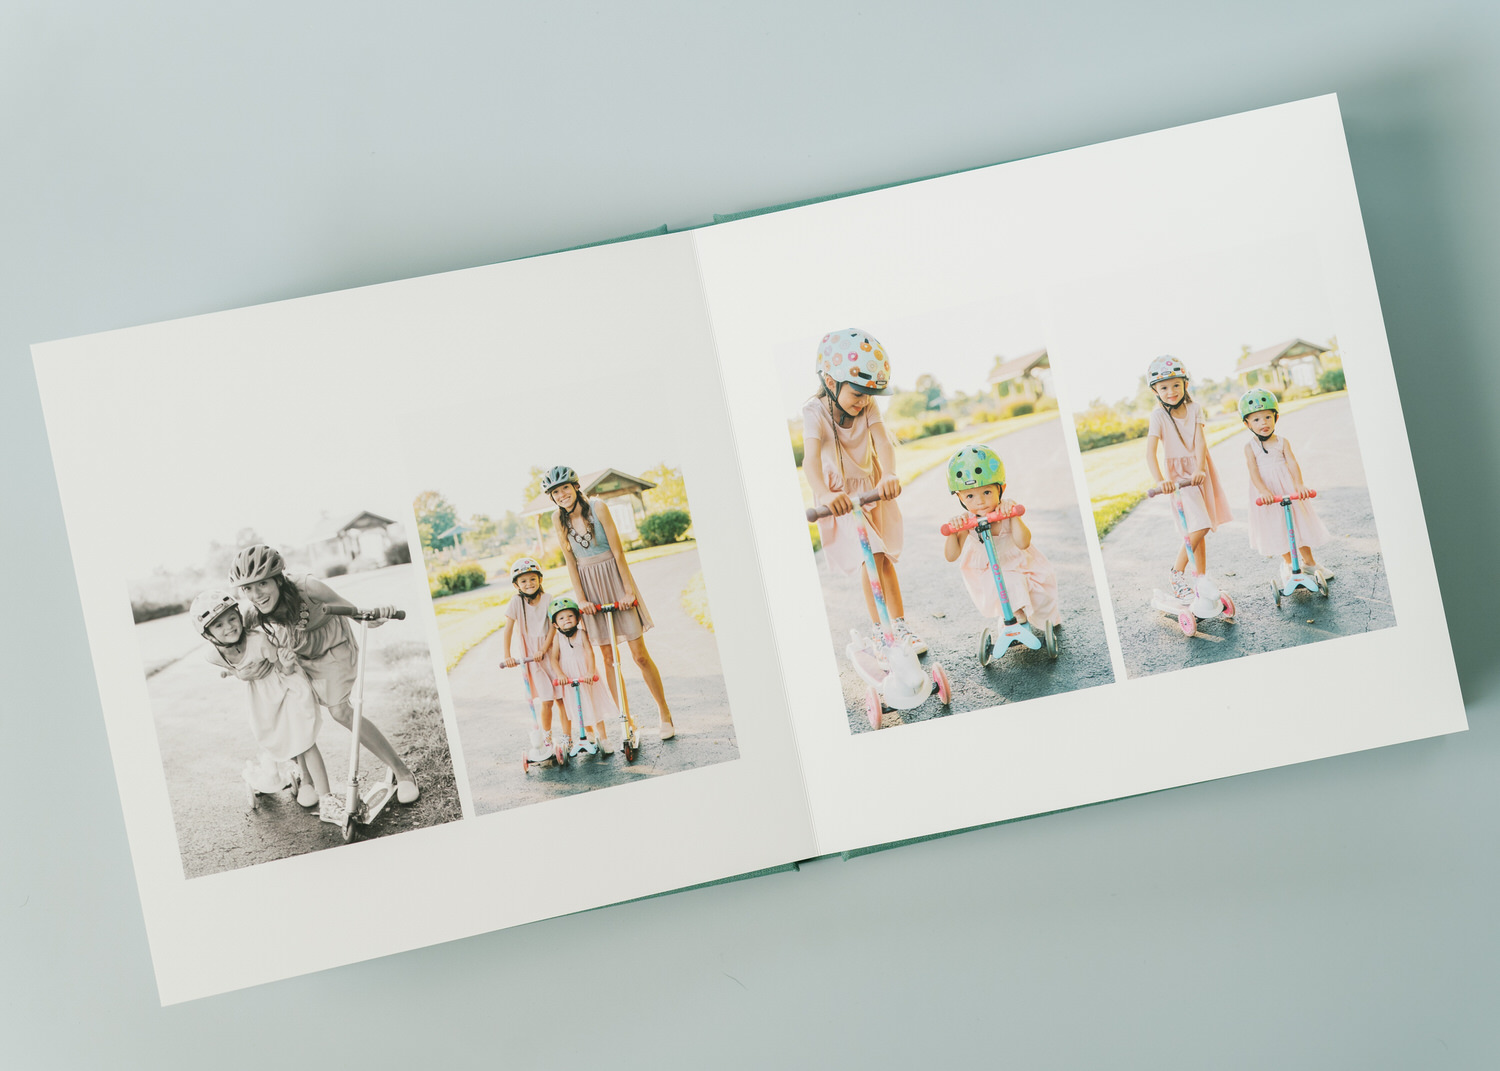 A photo album that shows pictures of two sisters riding scooters